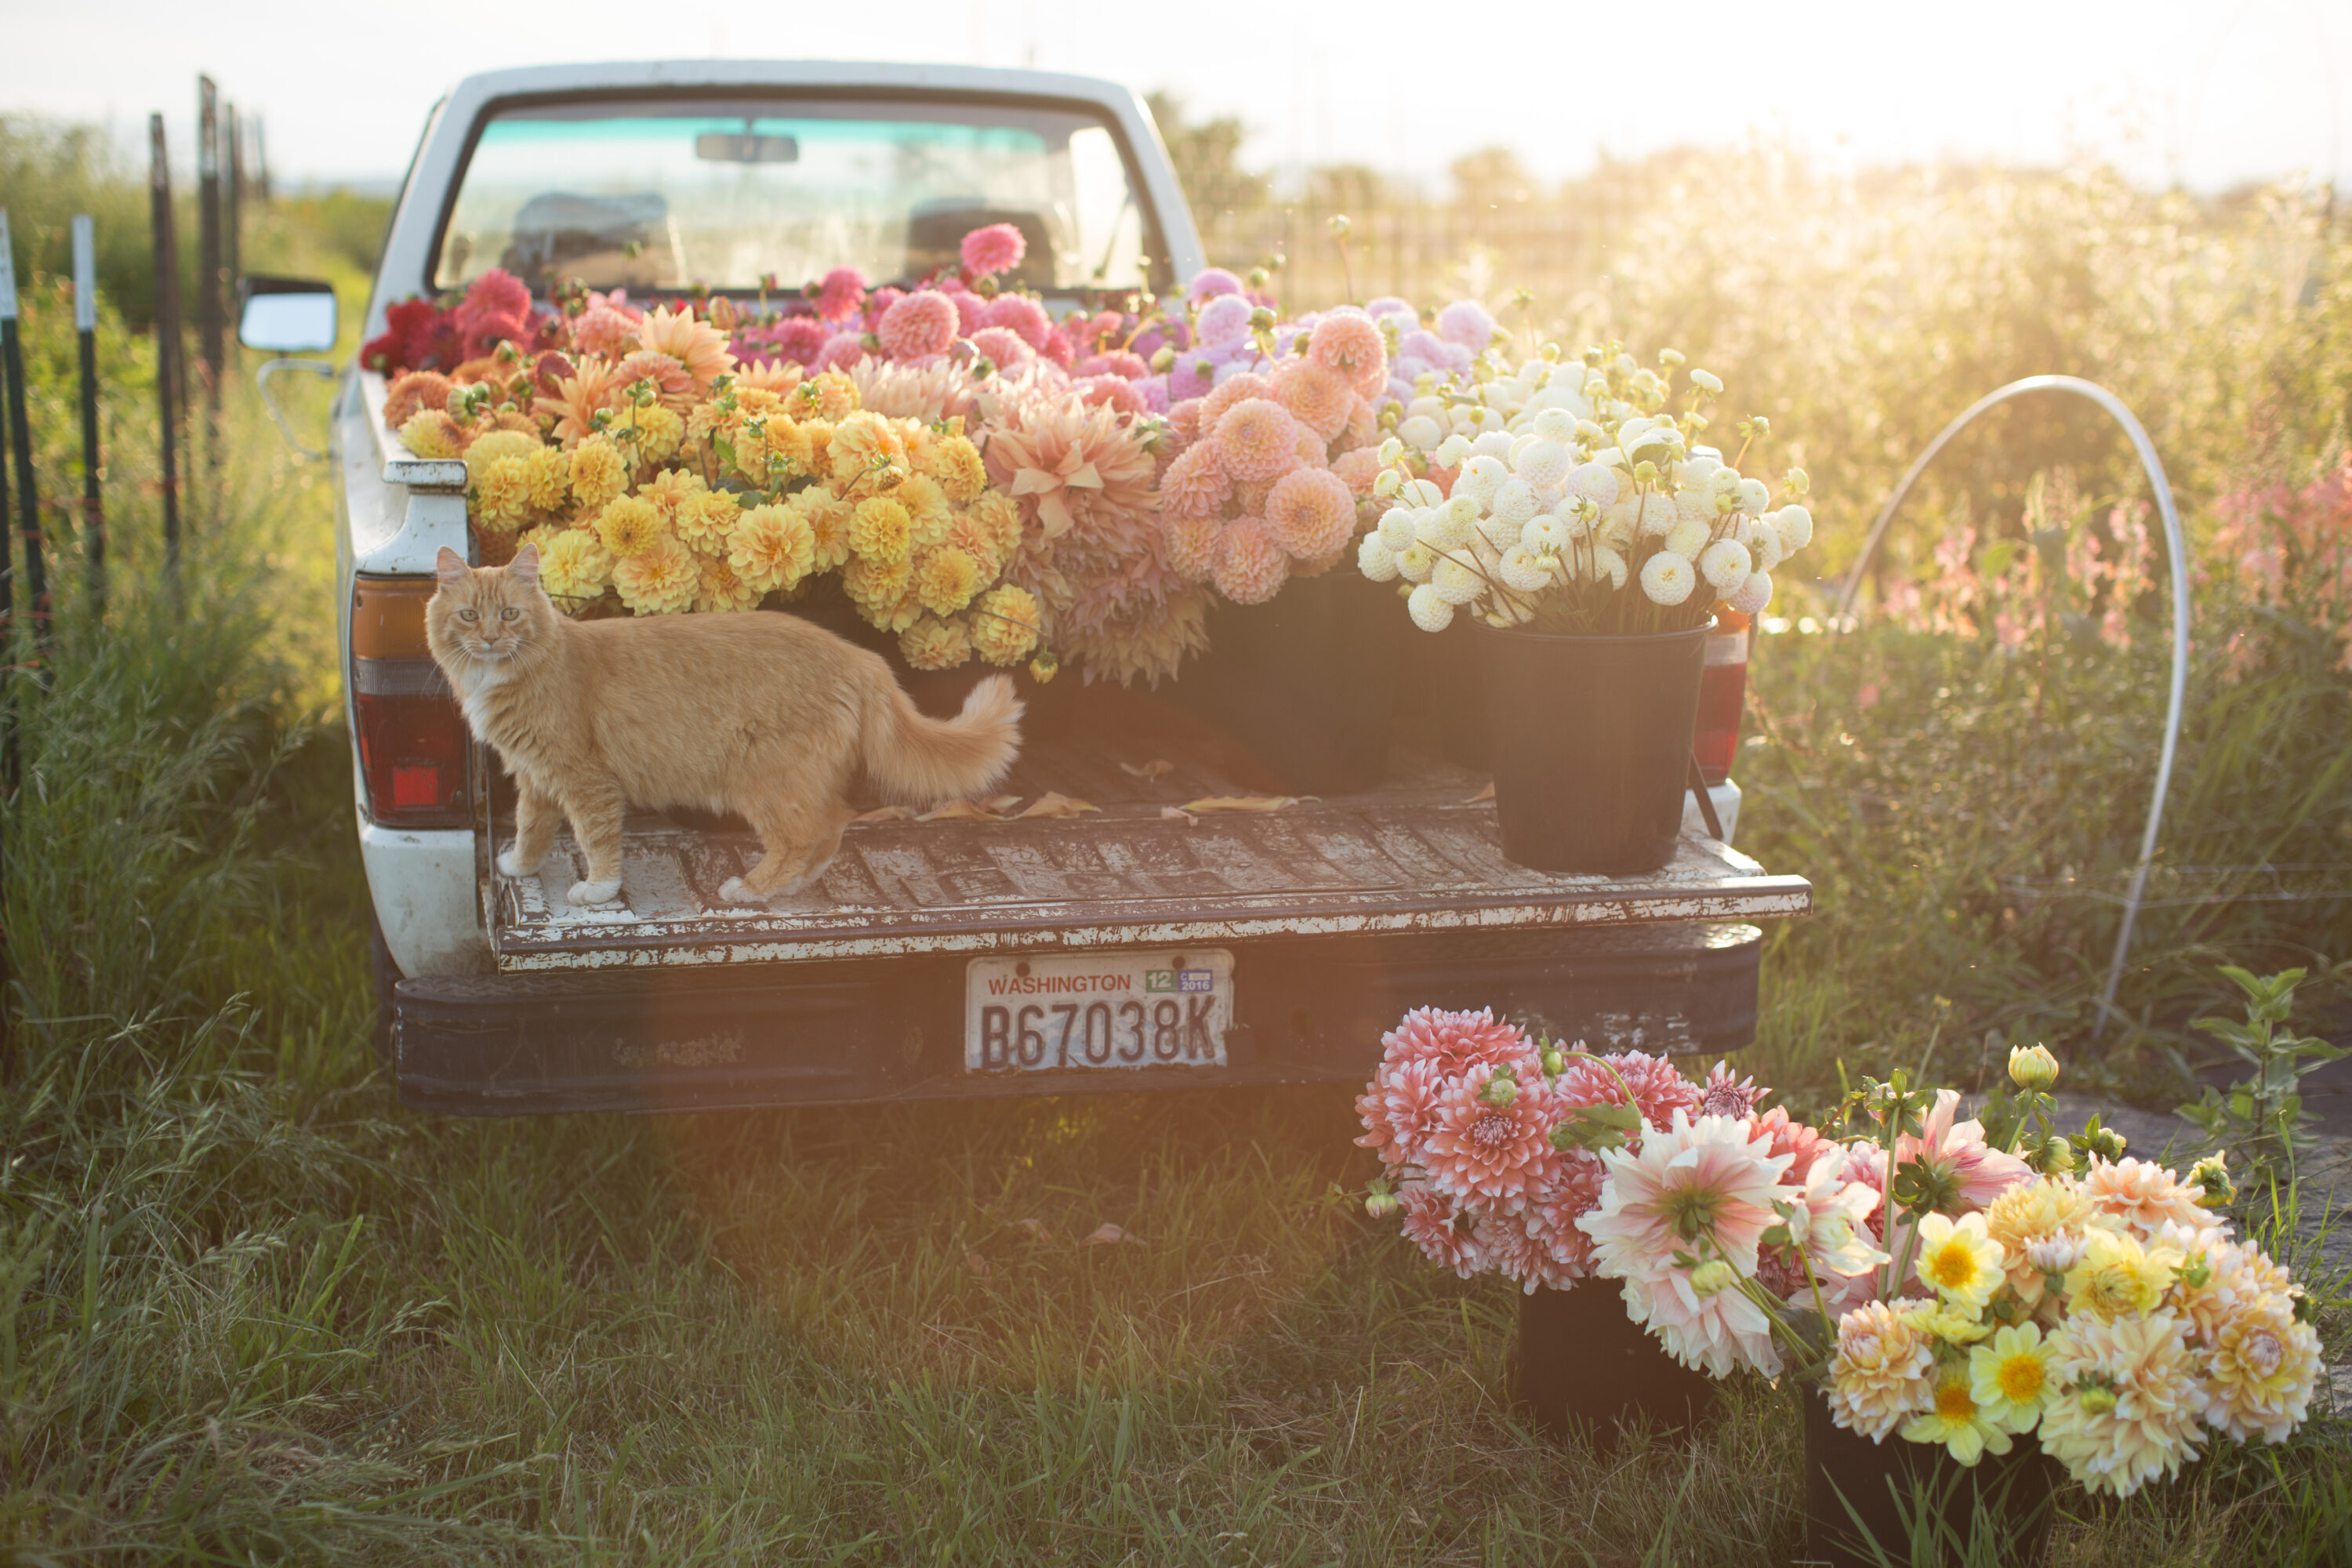 Timmy the cat with Floret truck full of dahlias